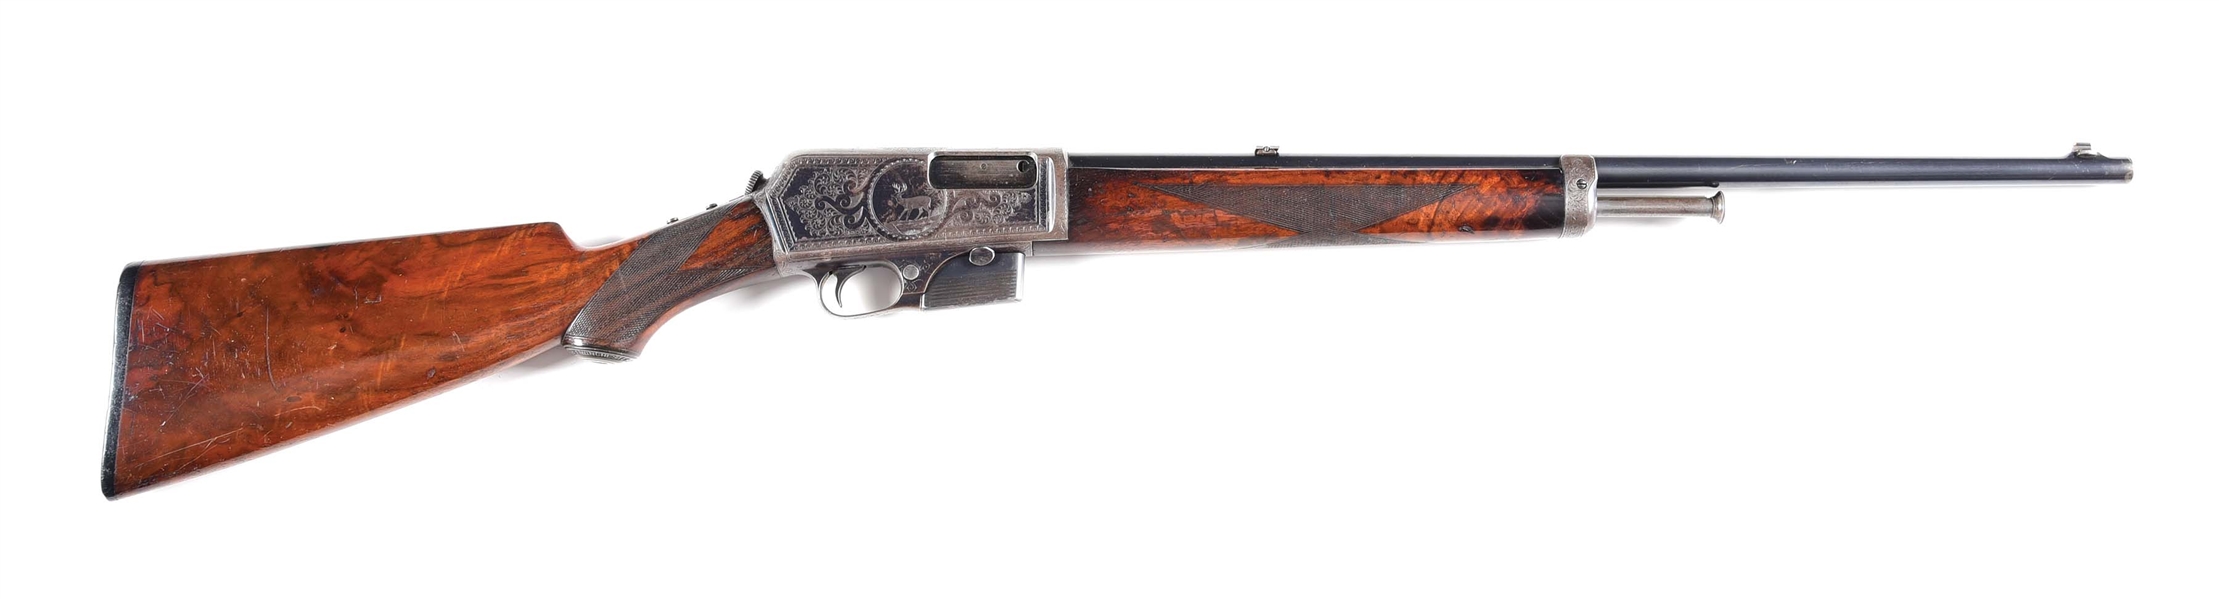 (C) WINCHESTER MODEL 1905 DELUXE FACTORY ENGRAVED .32 SEMI-AUTOMATIC RIFLE.